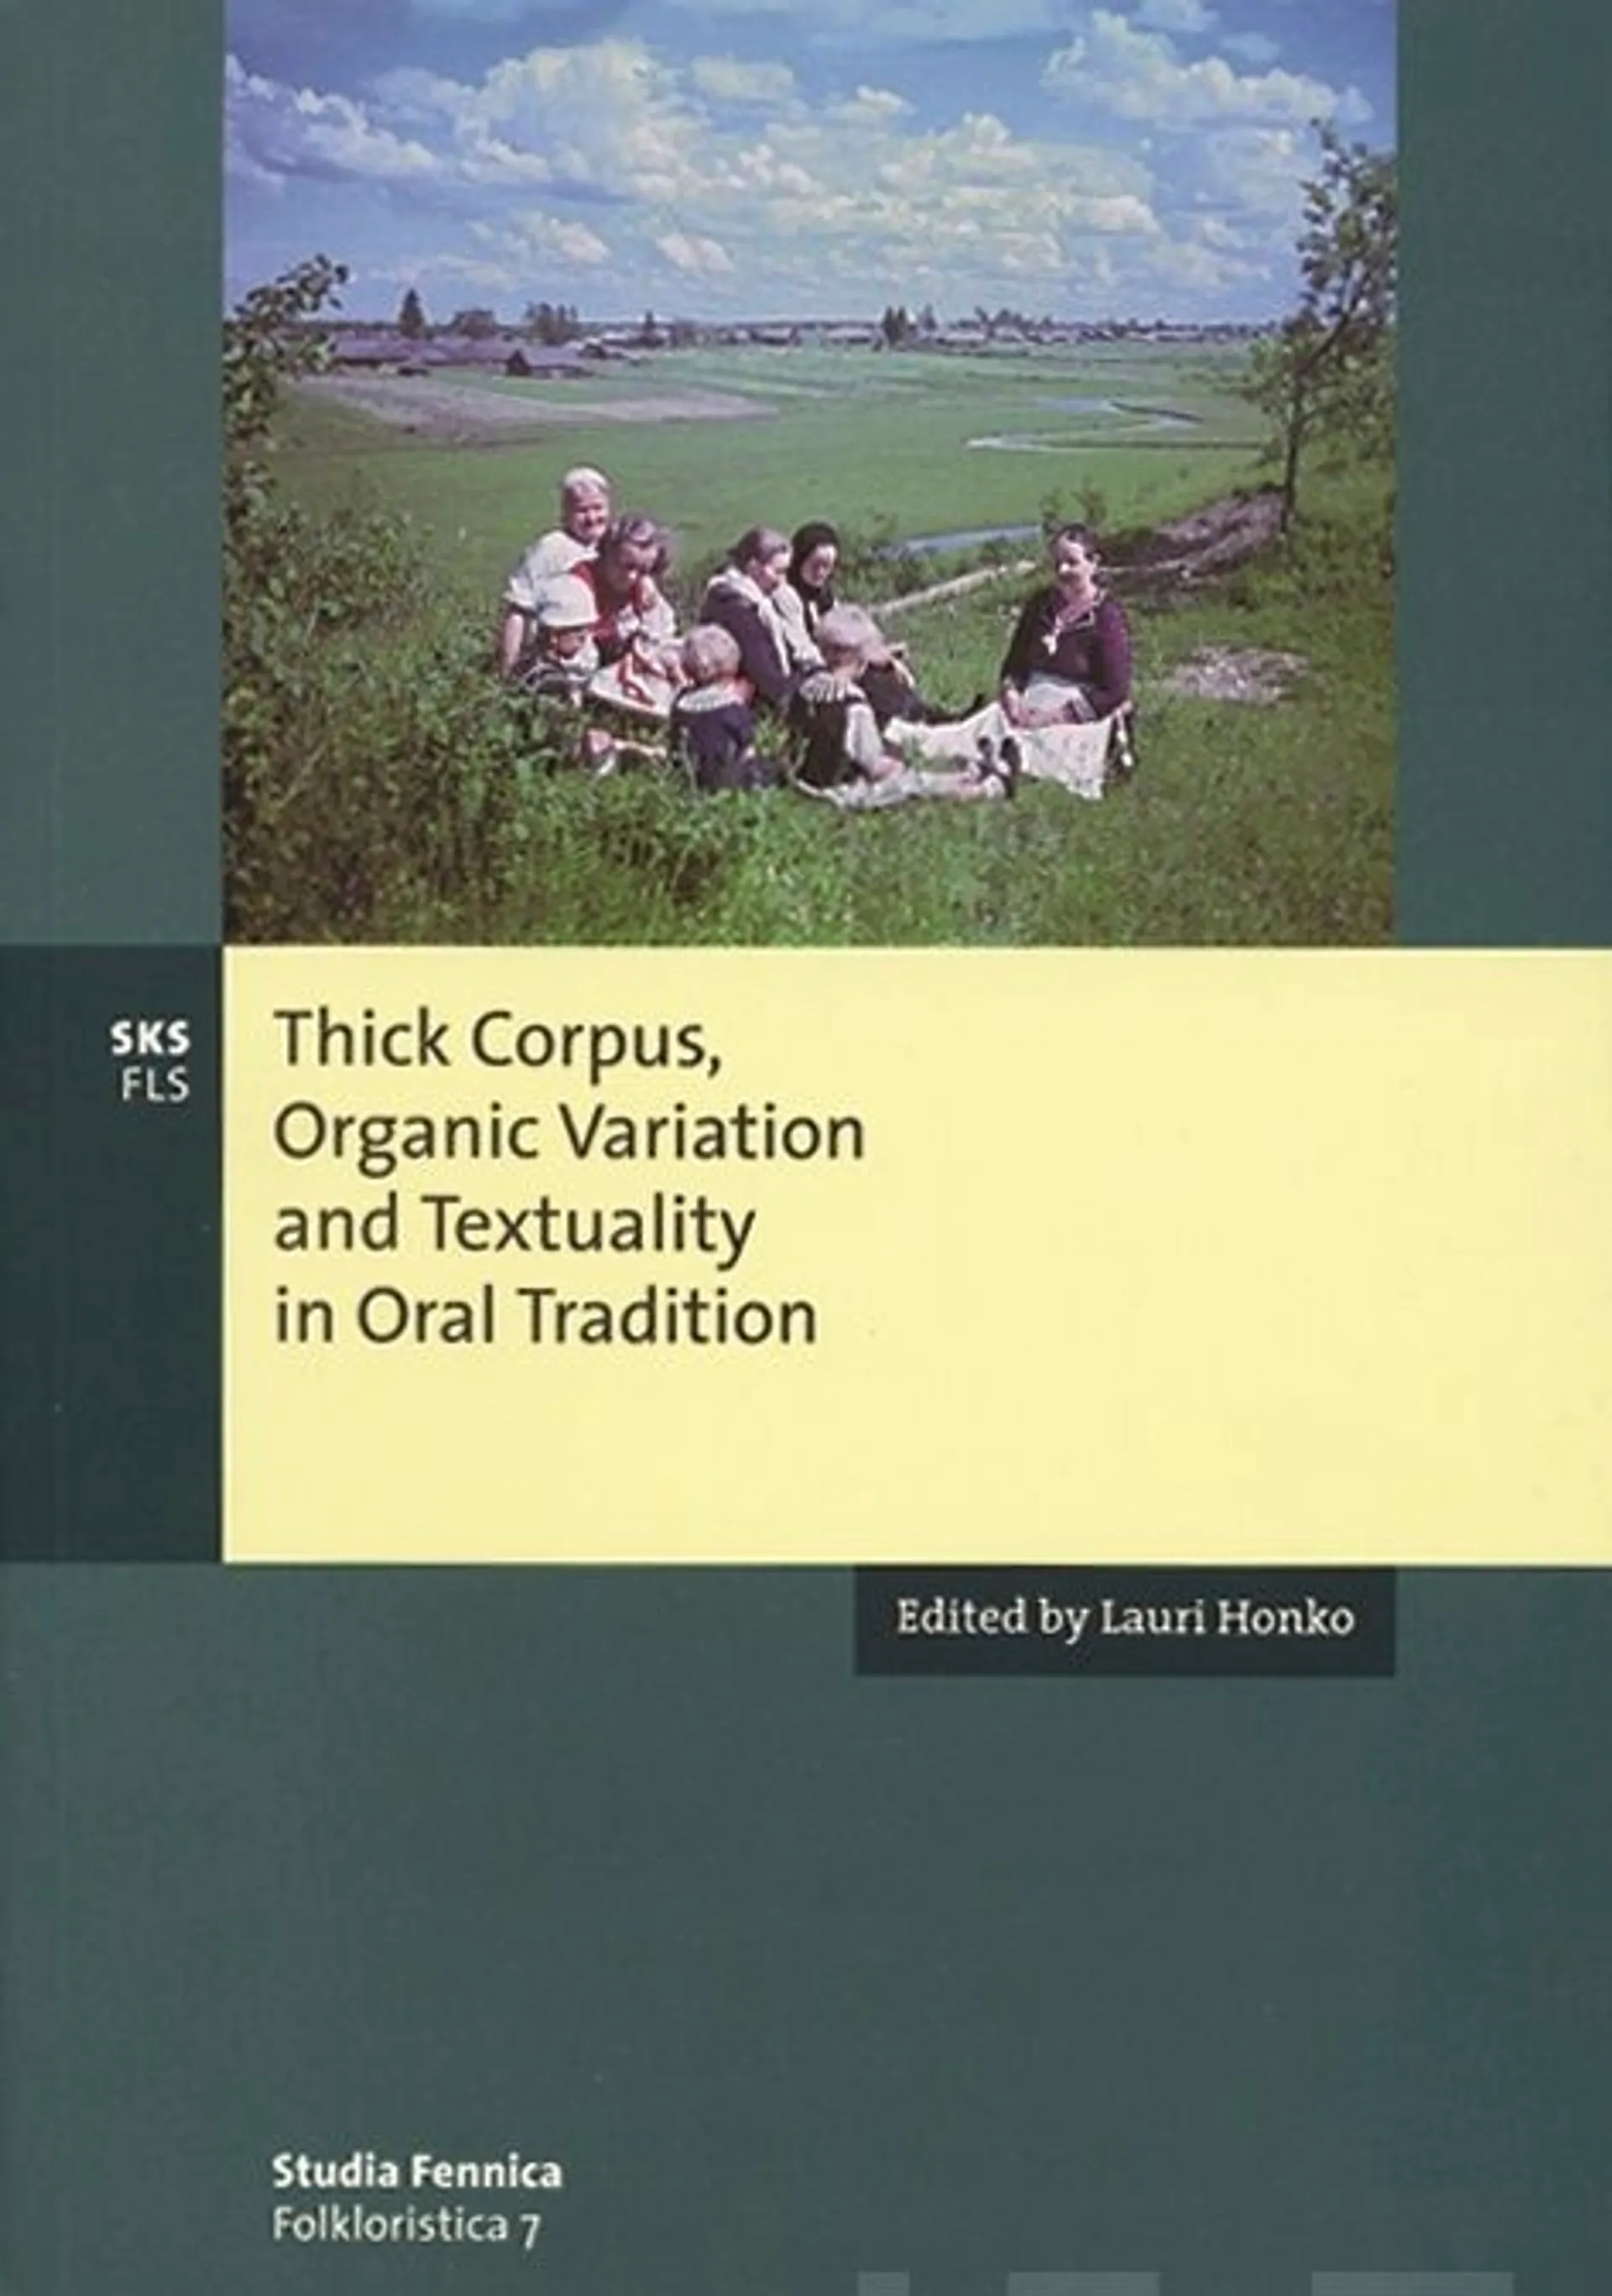 Thick corpus, organic variation and textuality in oral tradition